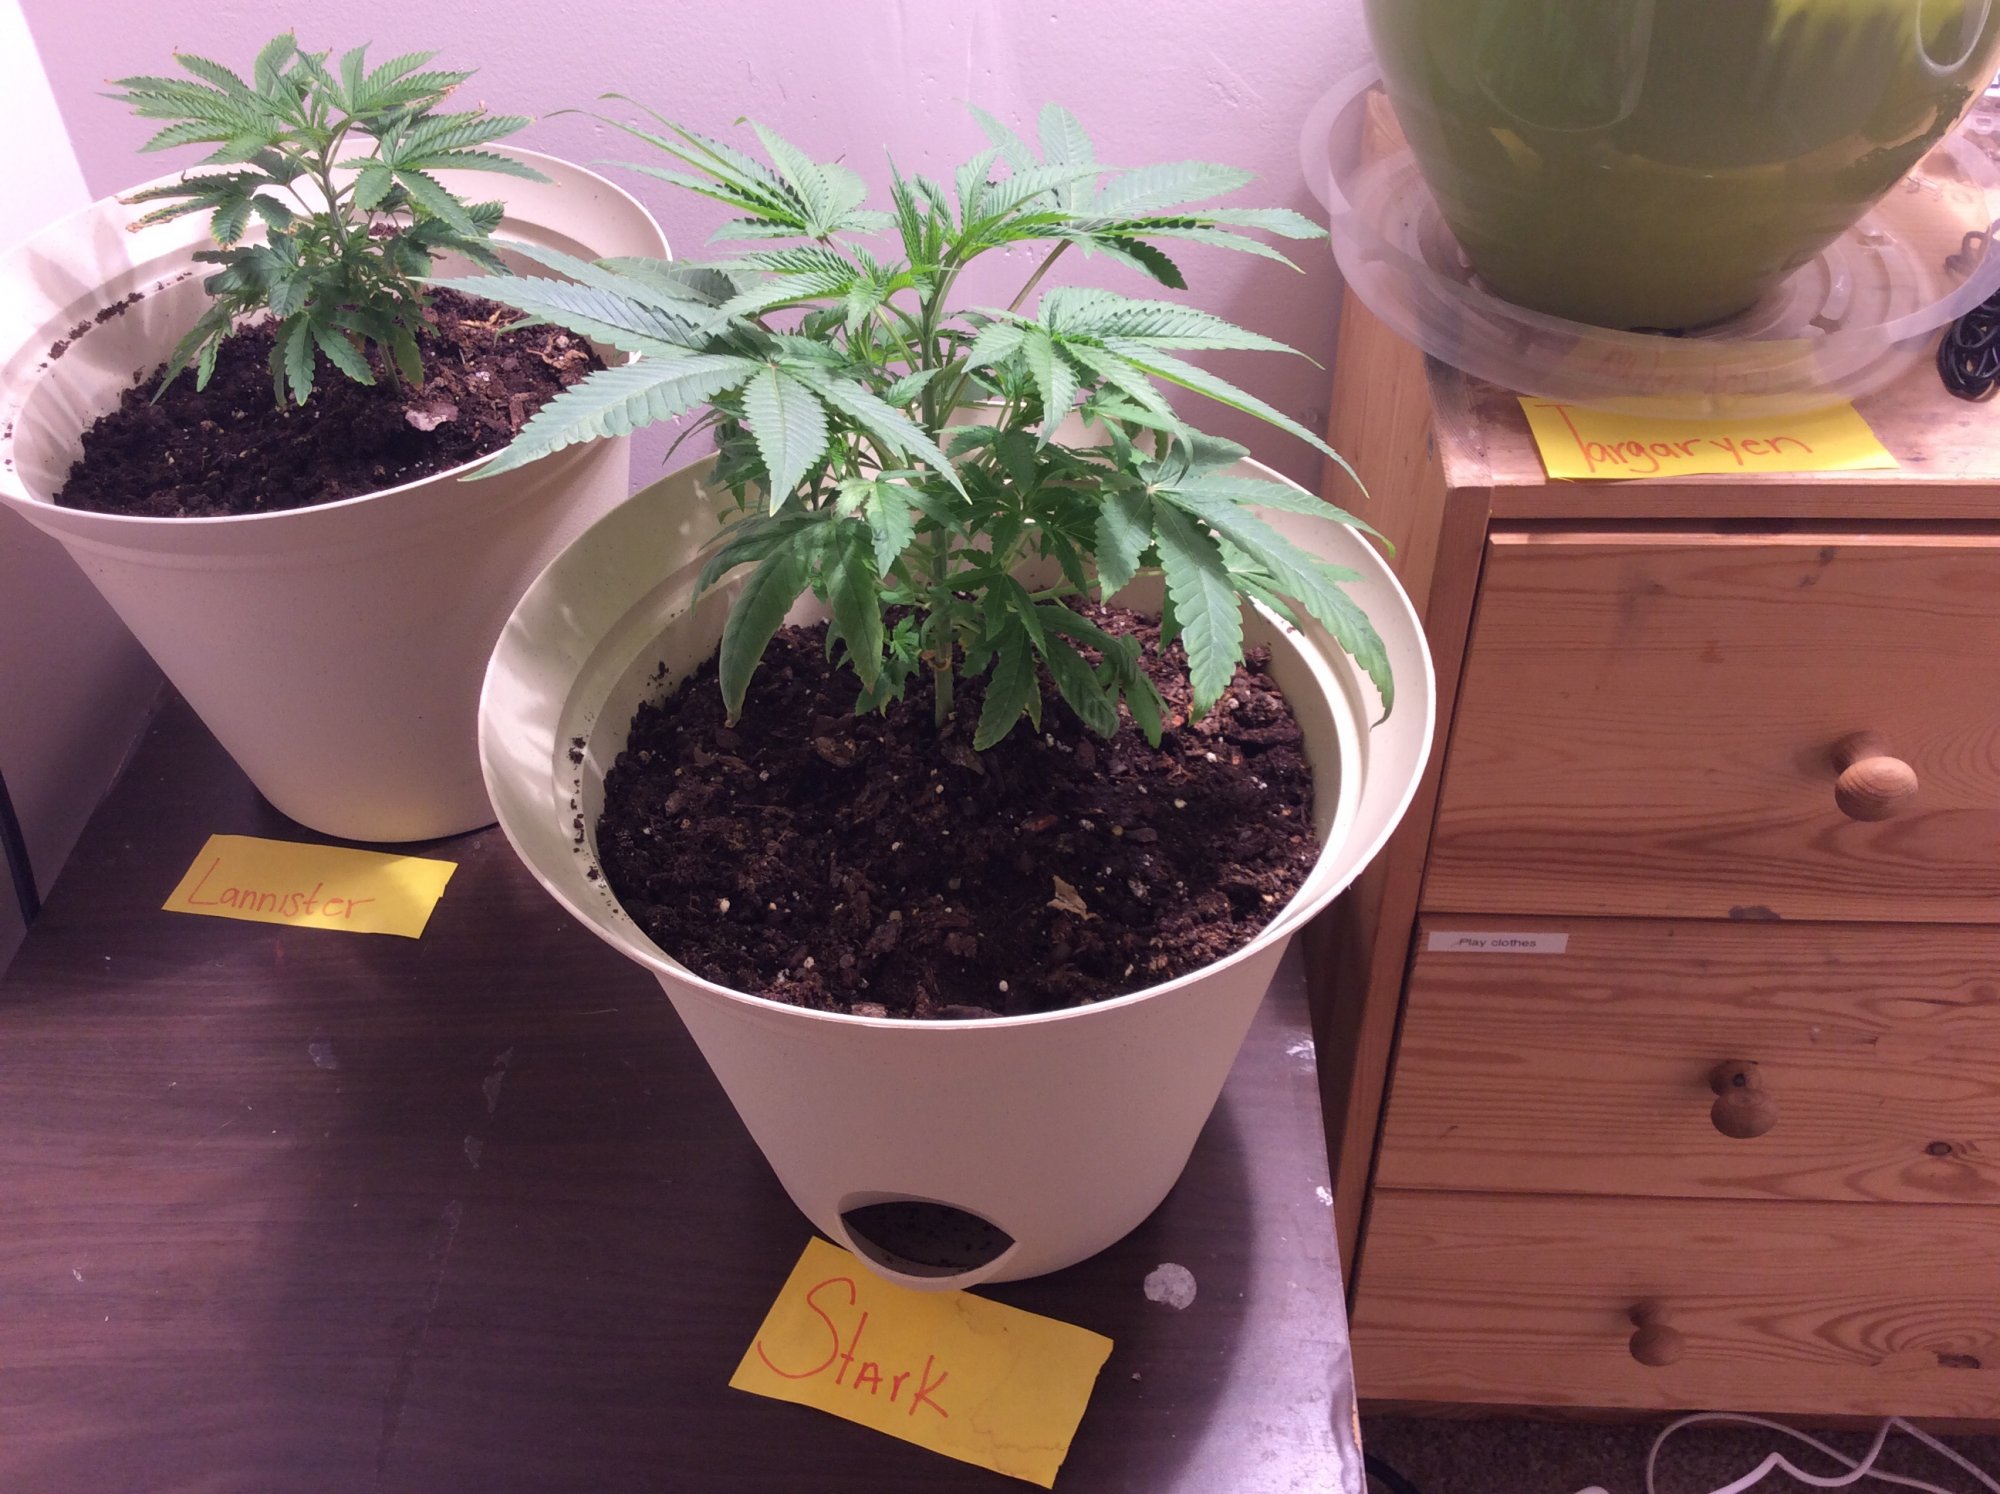 First time grower looking for some help